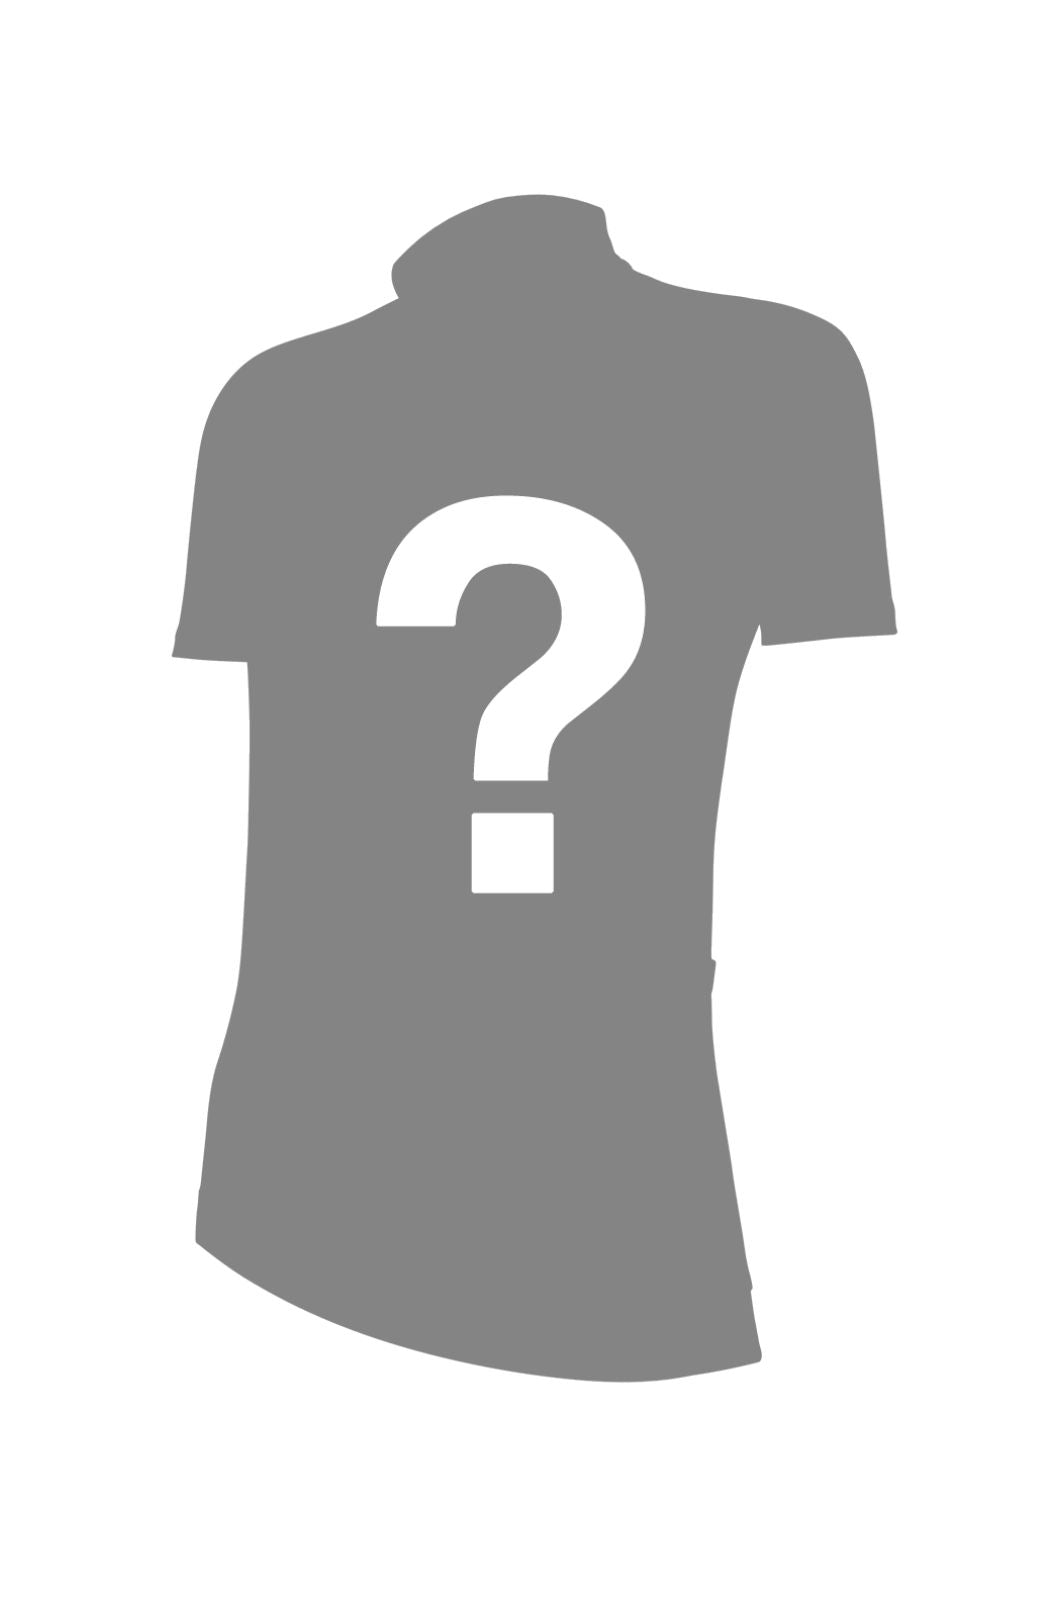 Unique Cycling Jersey - Mystery Women's